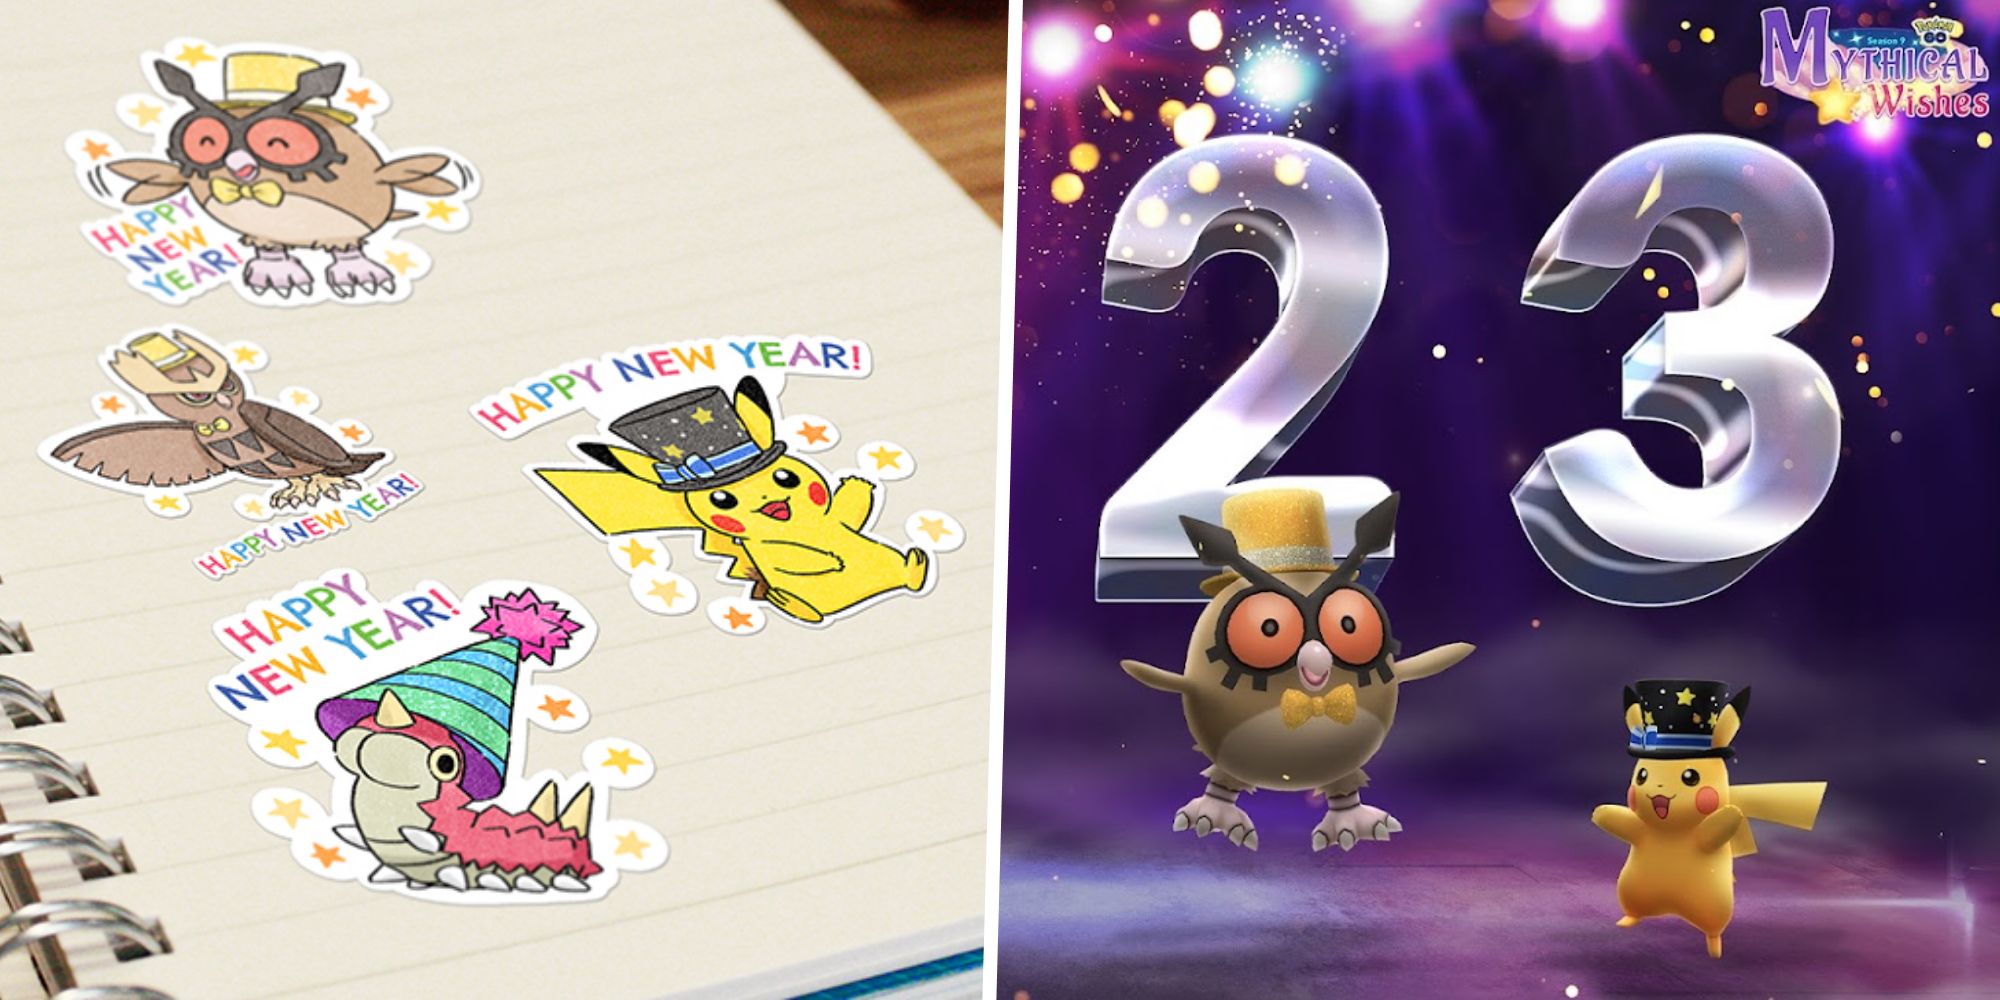 Pokemon Go New Year's 2023 Stickers split with an costumed Hoothoot and Pikachu